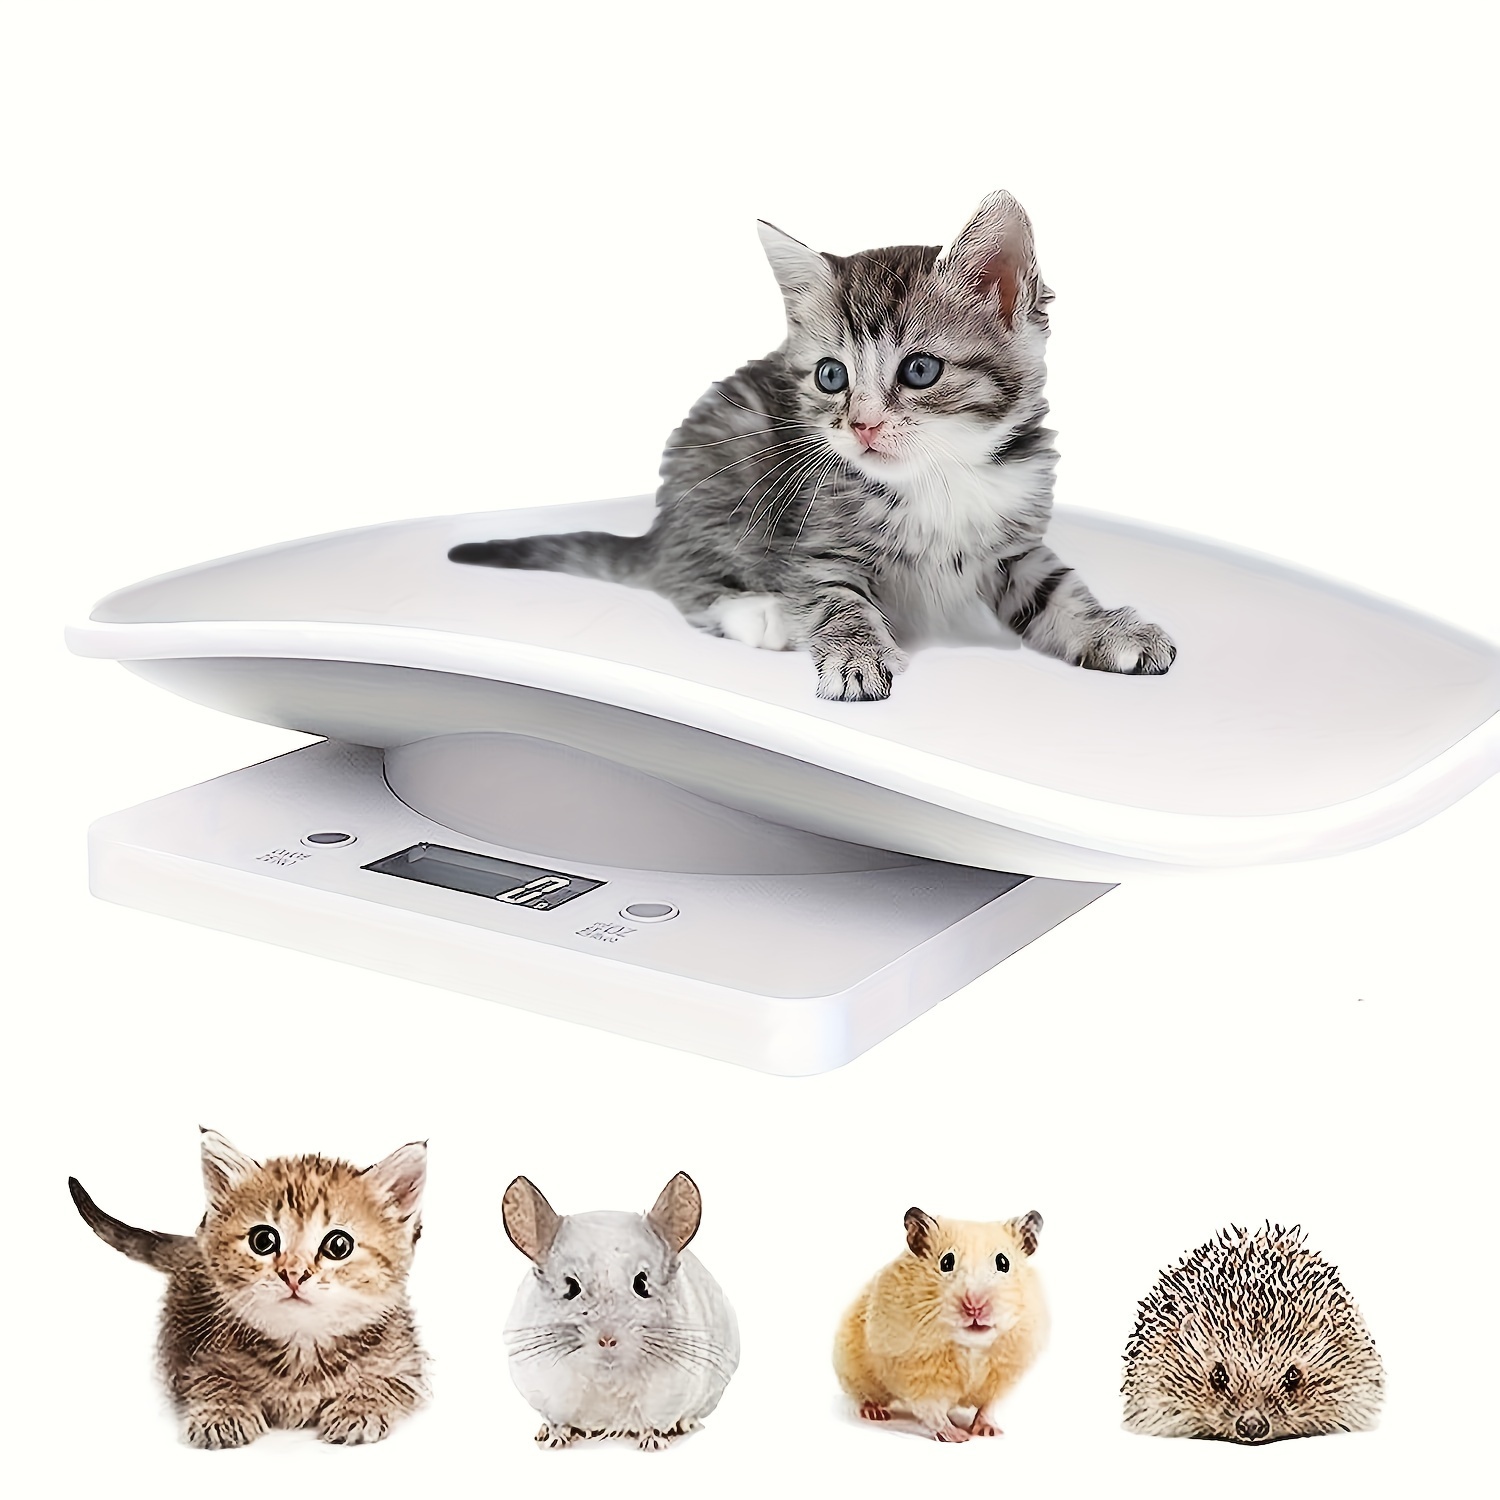 LCD Digital Pet Dog Cat Scale 150kg Capacity Electronic Pet Scale Weight  White